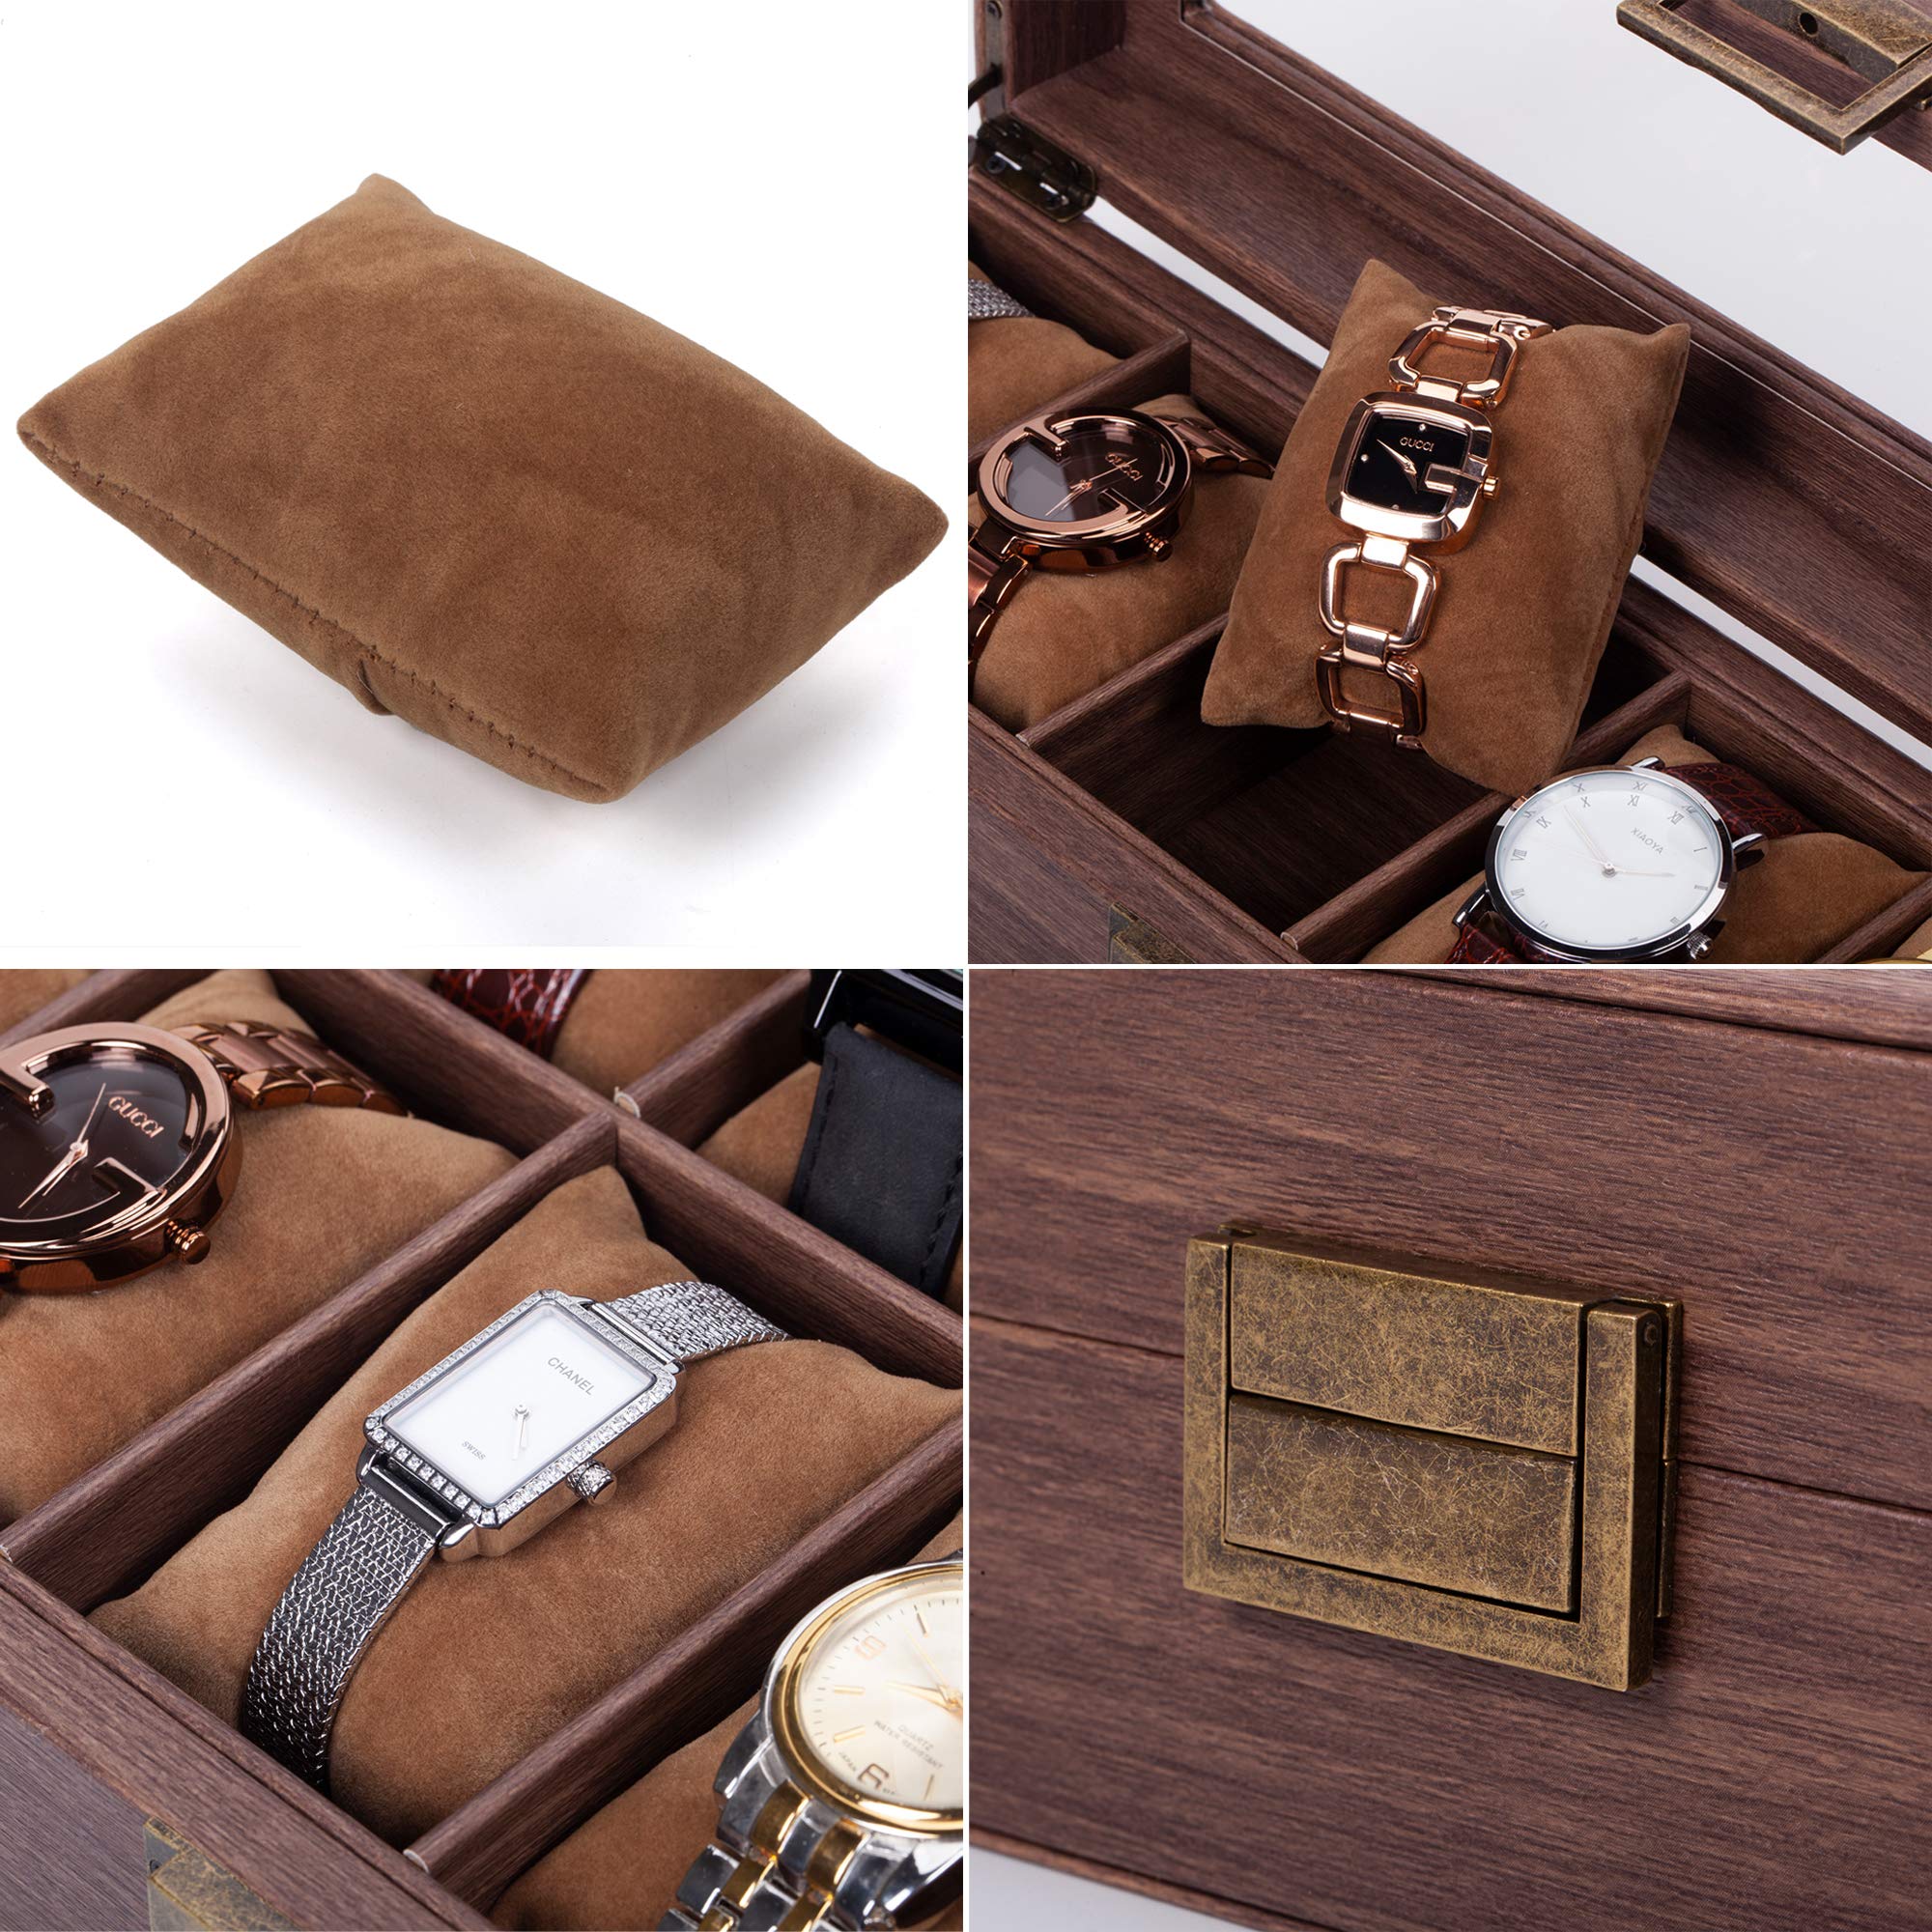 READAEER 6 Slot PU Leather Watch Box Organizer Watch Case with Glass Top